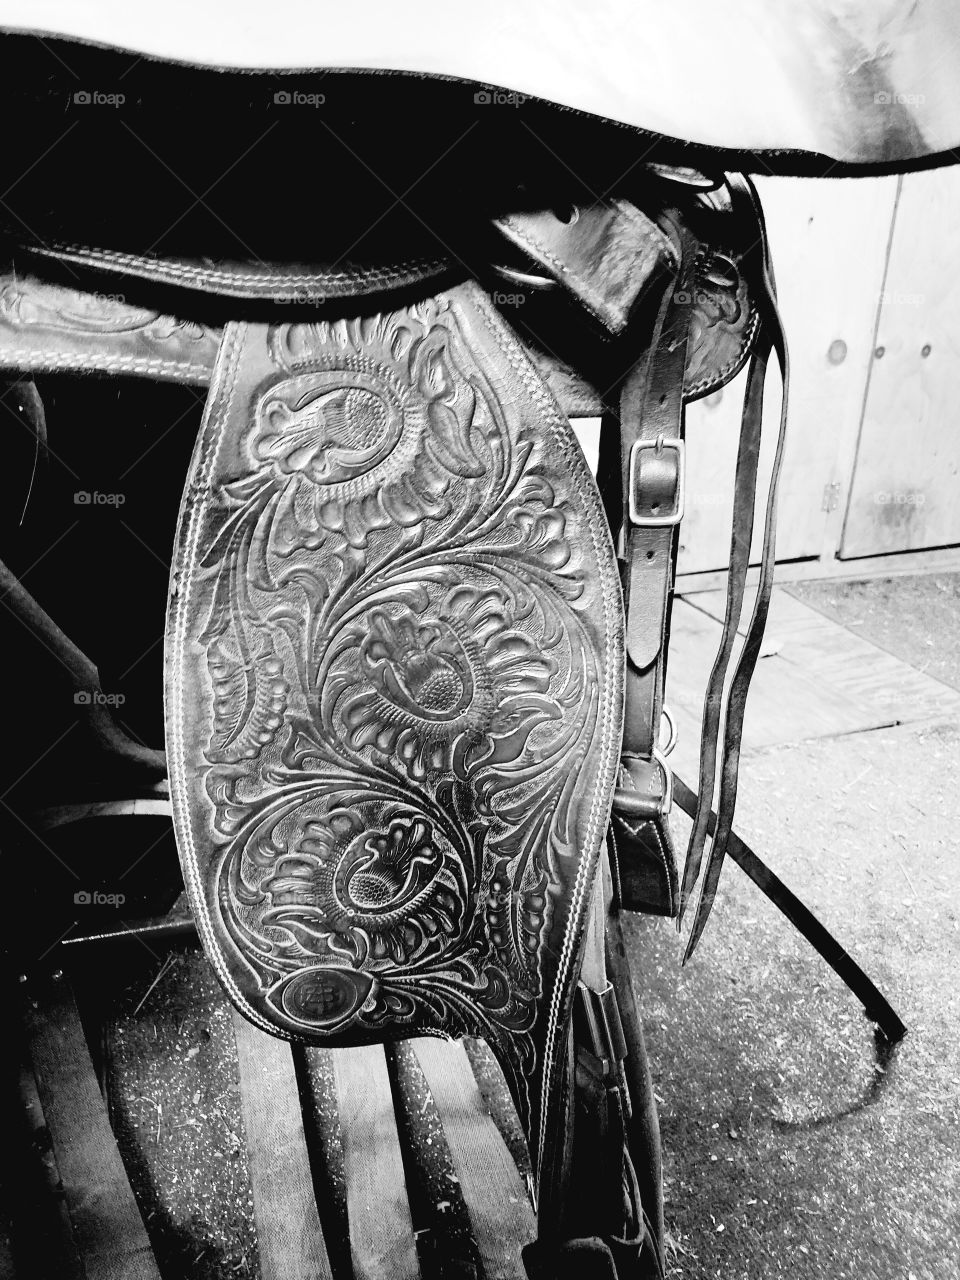 embossed leather work on a western saddle, black and white